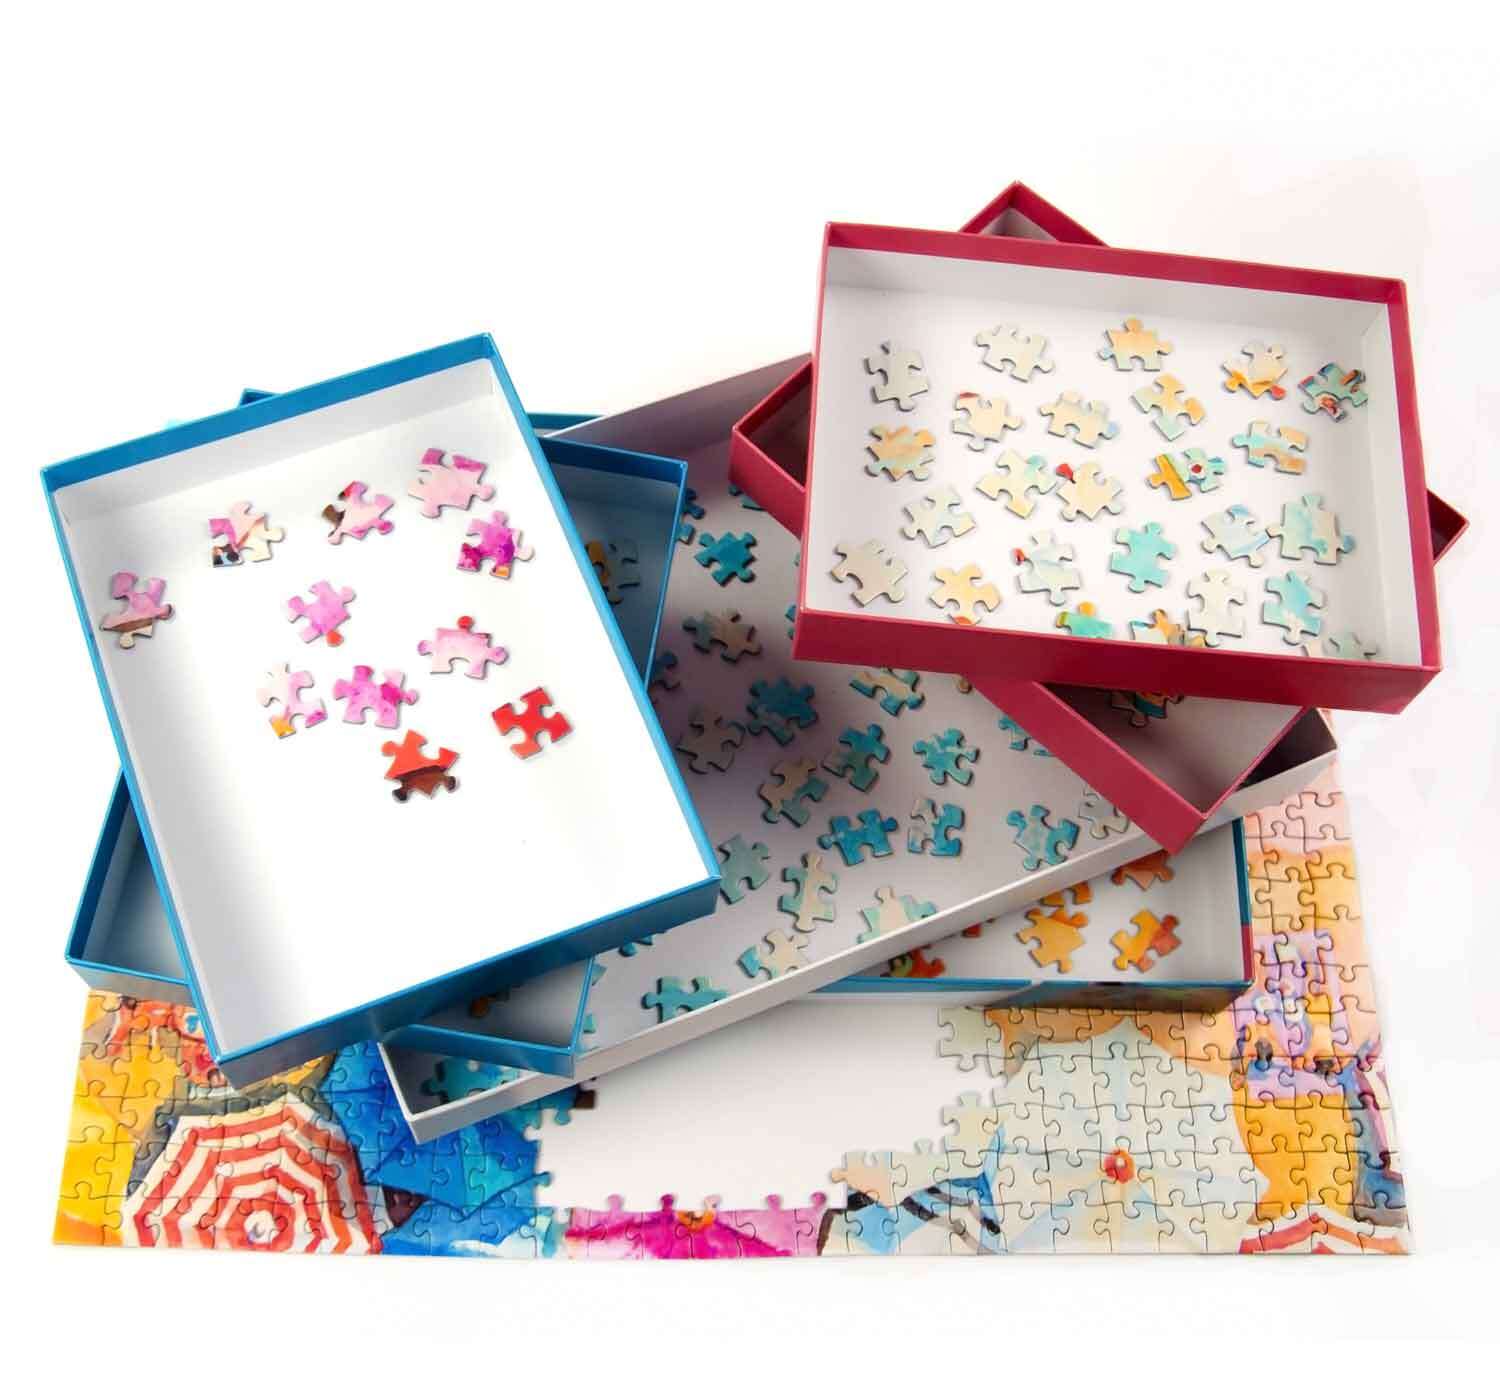 Giftable Jigsaw Puzzle Organizers!